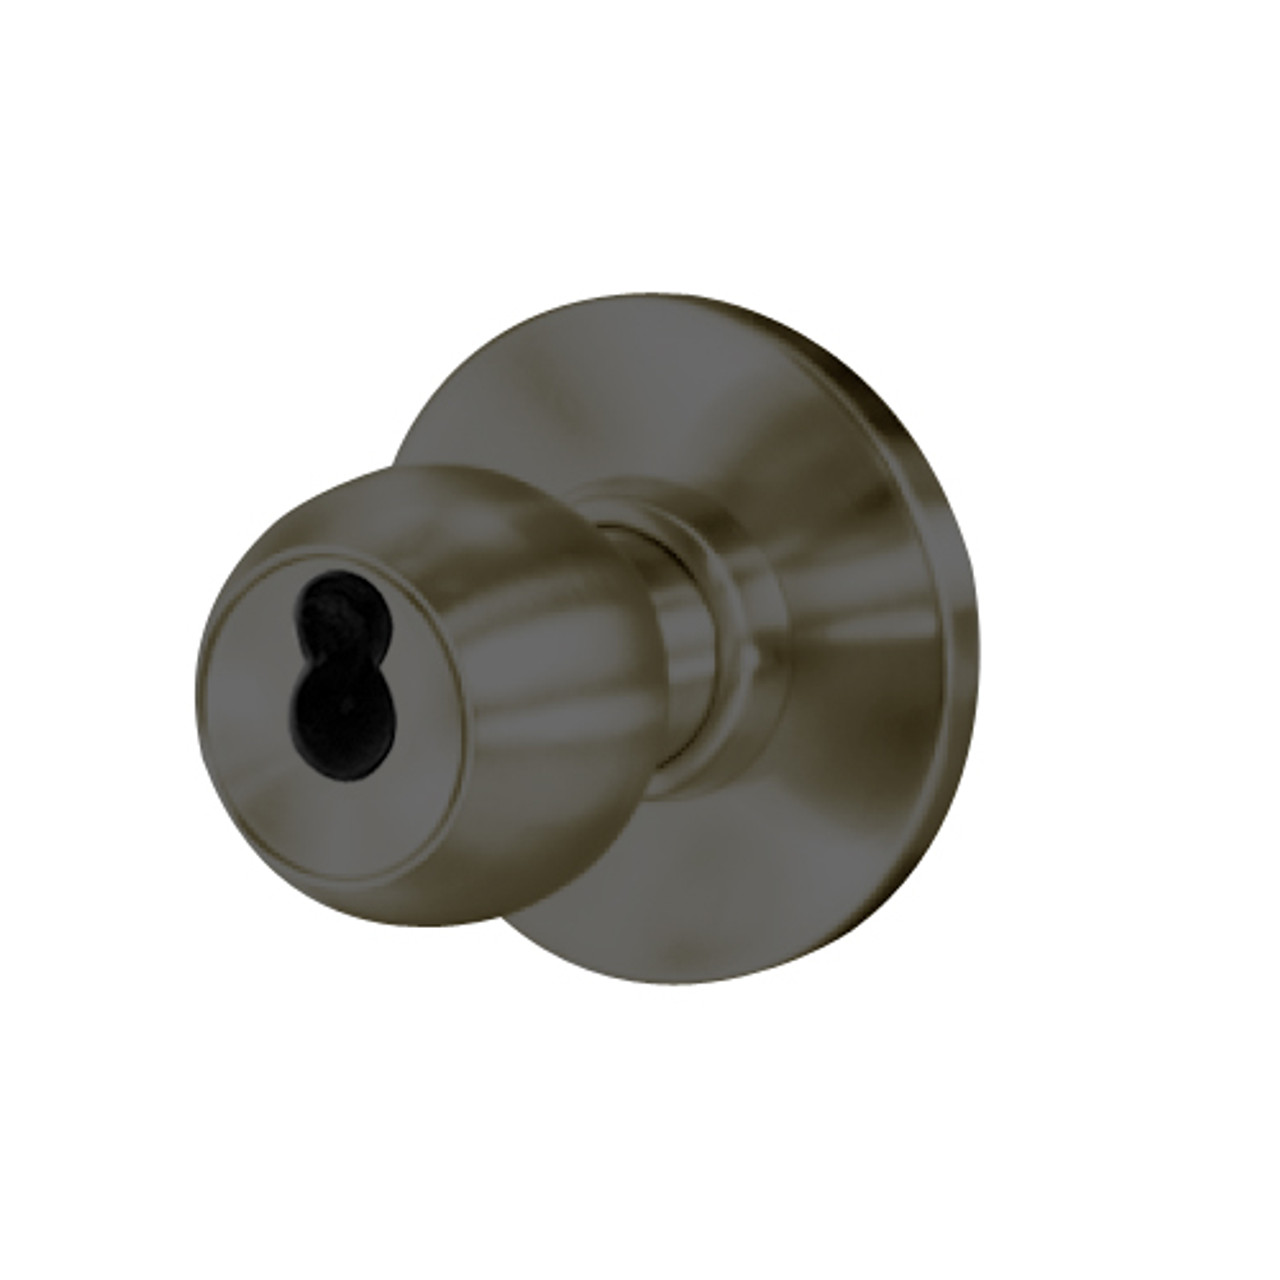 8K57YD4ASTK613 Best 8K Series Exit Heavy Duty Cylindrical Knob Locks with Round Style in Oil Rubbed Bronze